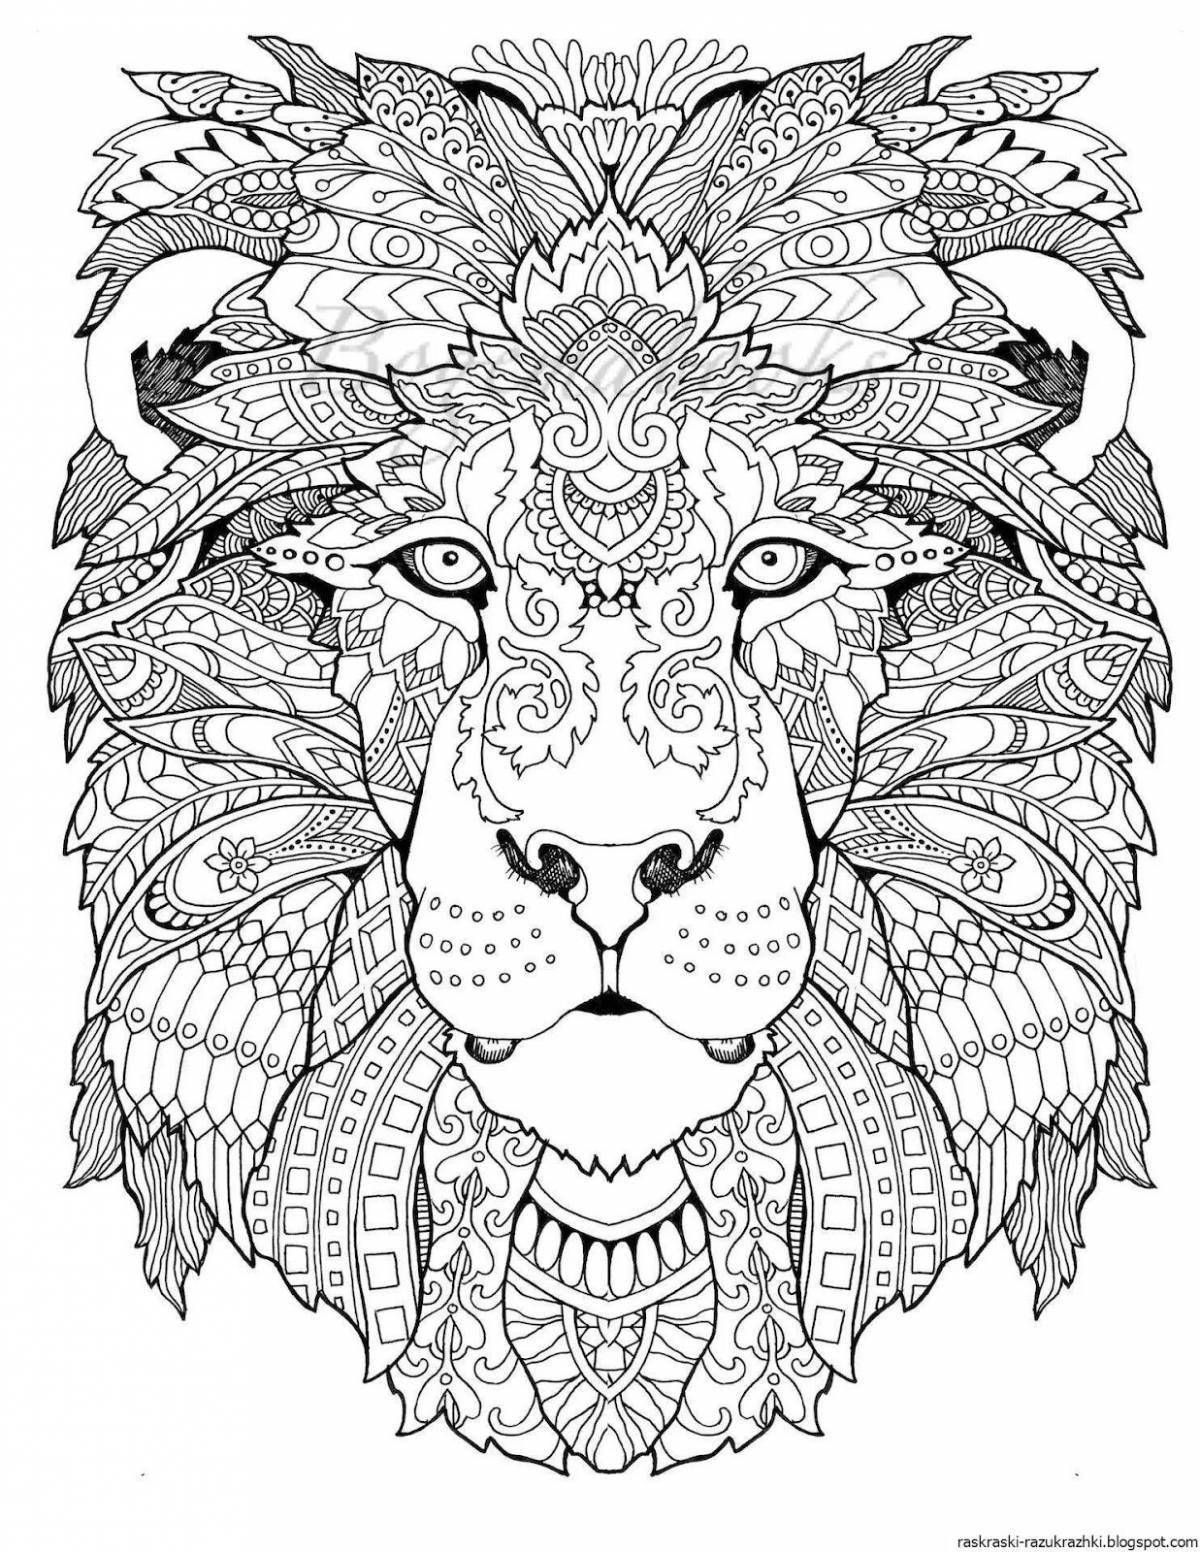 Stylish coloring book